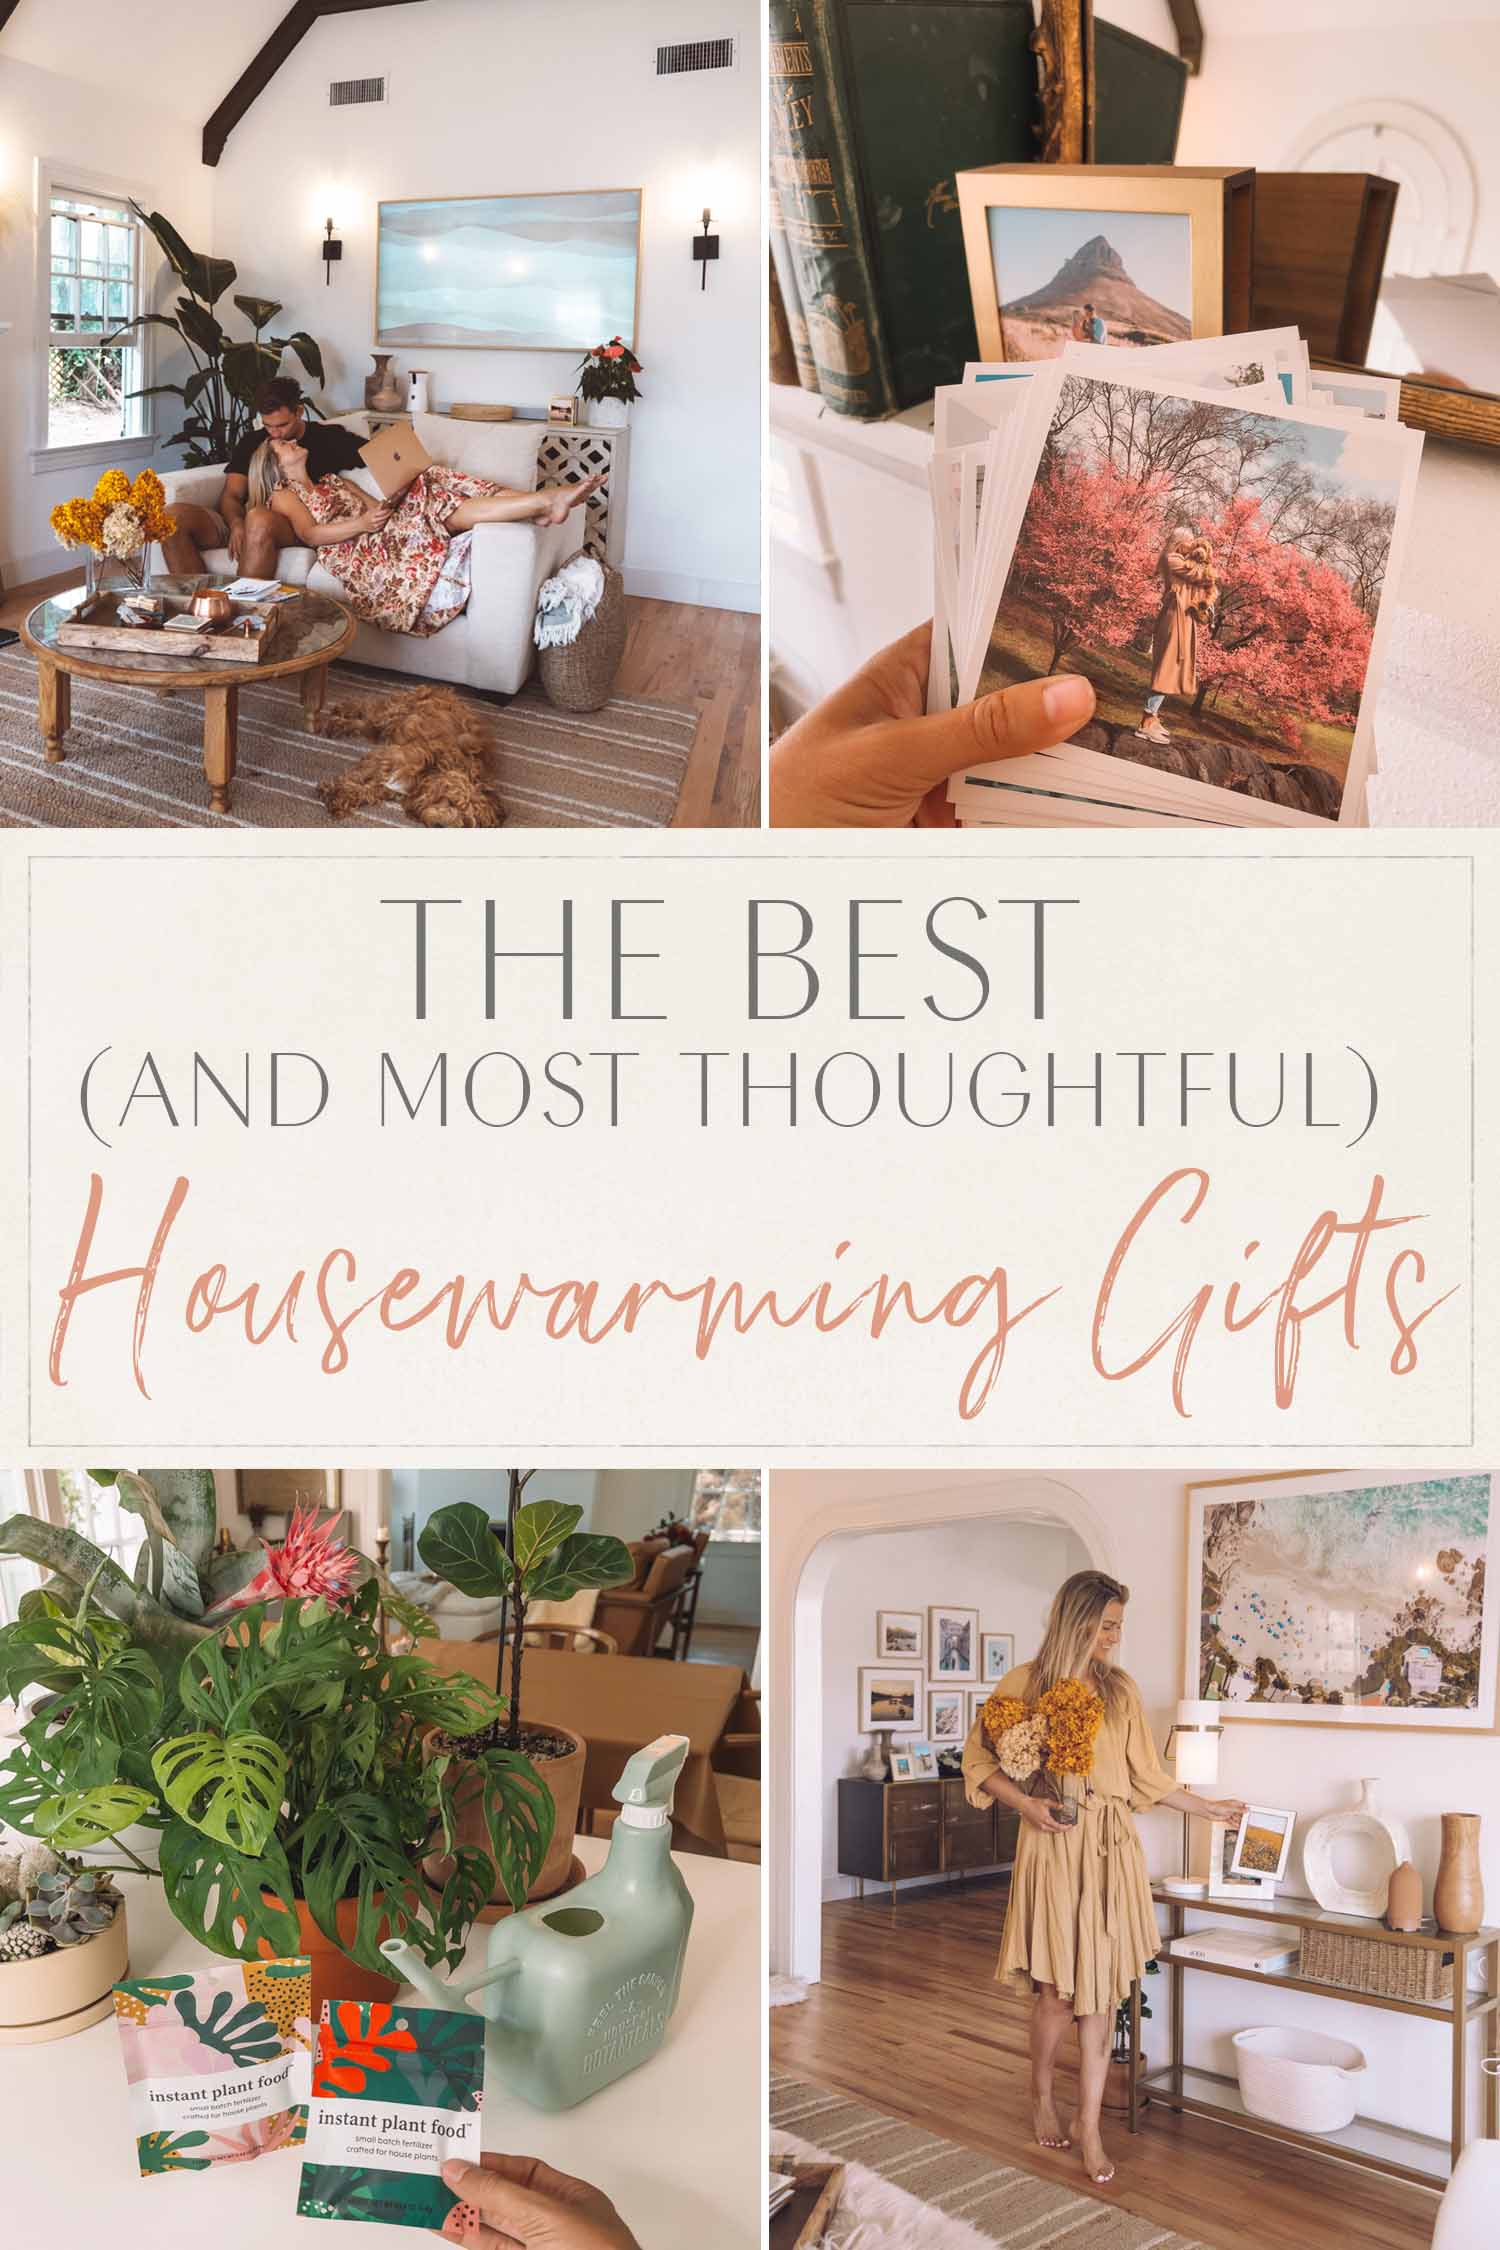 House Warming Gifts New Home - Housewarming Gifts for New House, House  Warming Gifts New Home Women - Housewarming Gift Ideas for Couple - New  Home